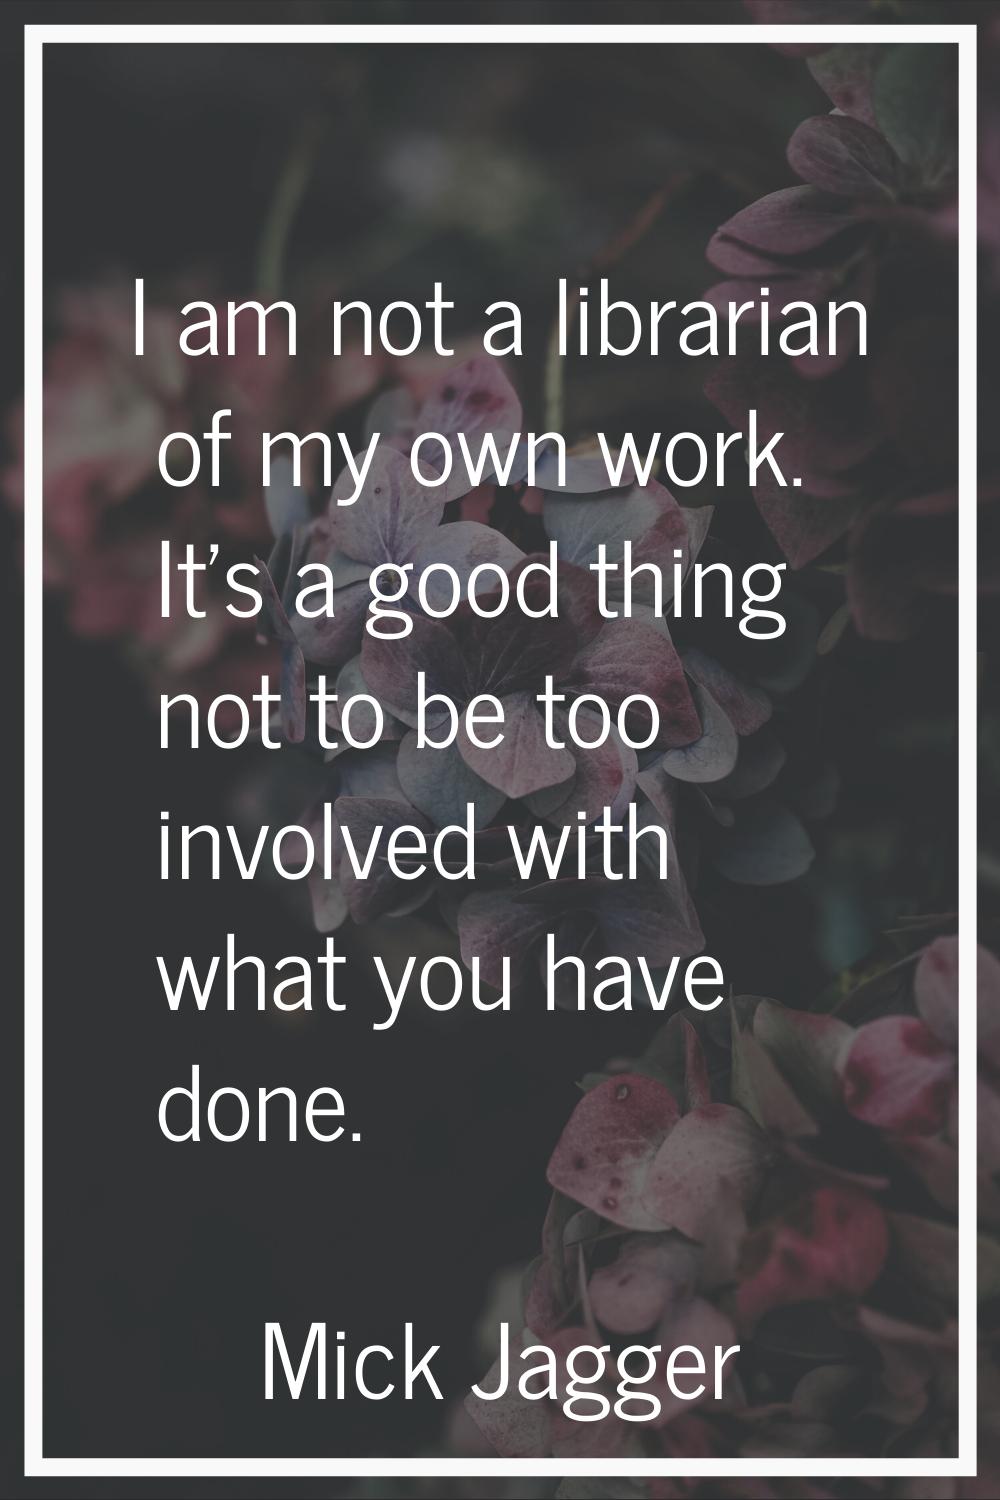 I am not a librarian of my own work. It's a good thing not to be too involved with what you have do